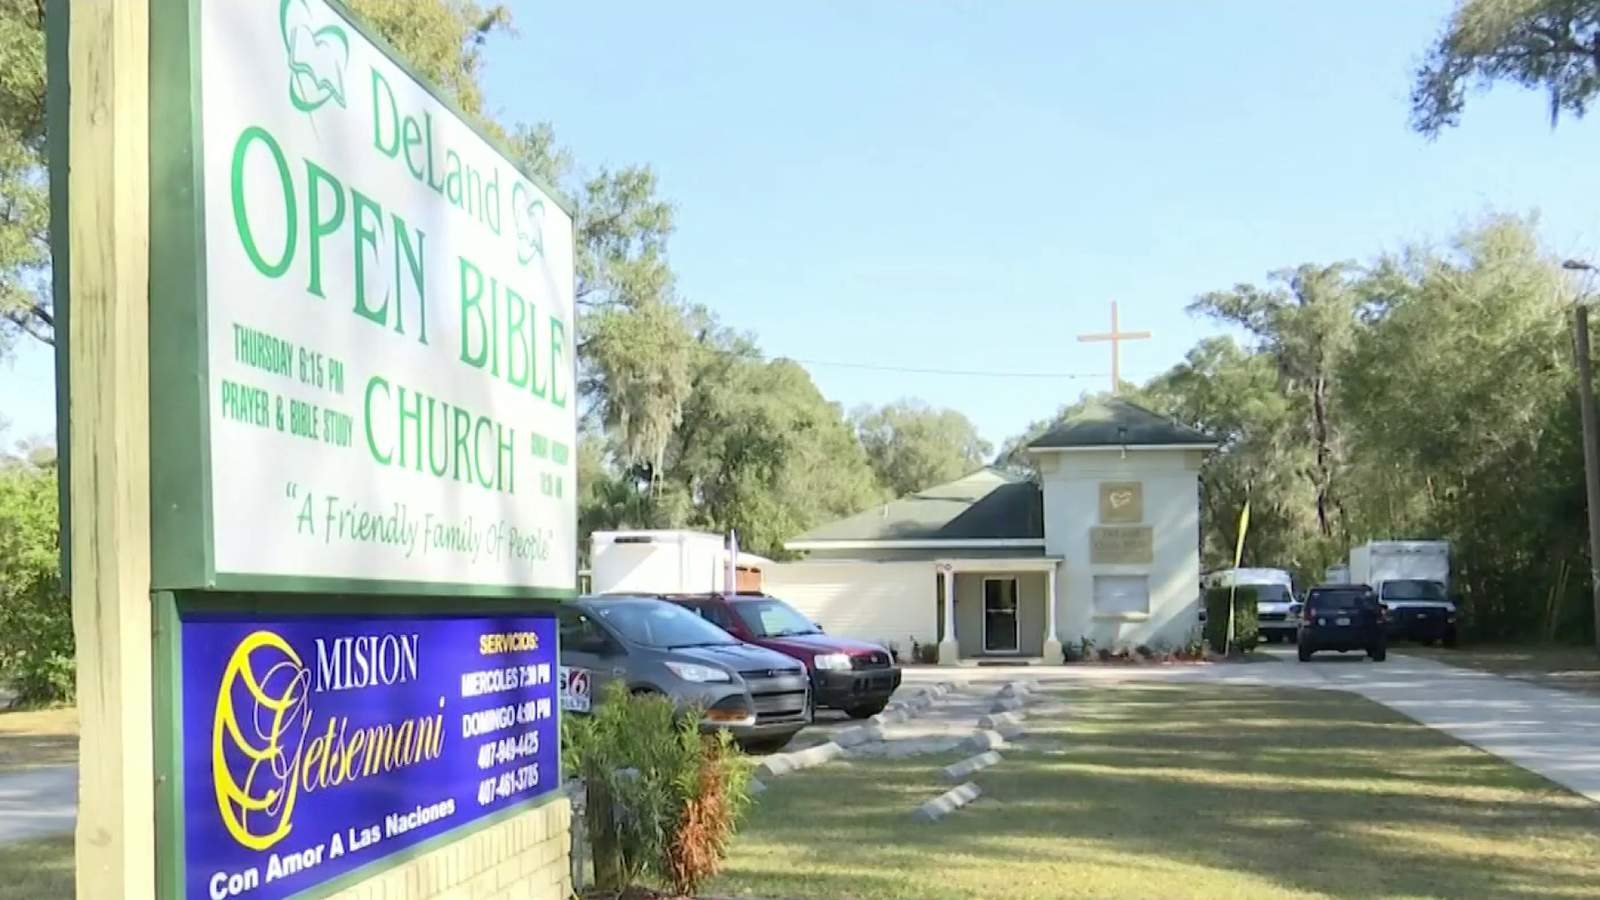 Second Harvest to replace stolen meat at DeLand church food pantry